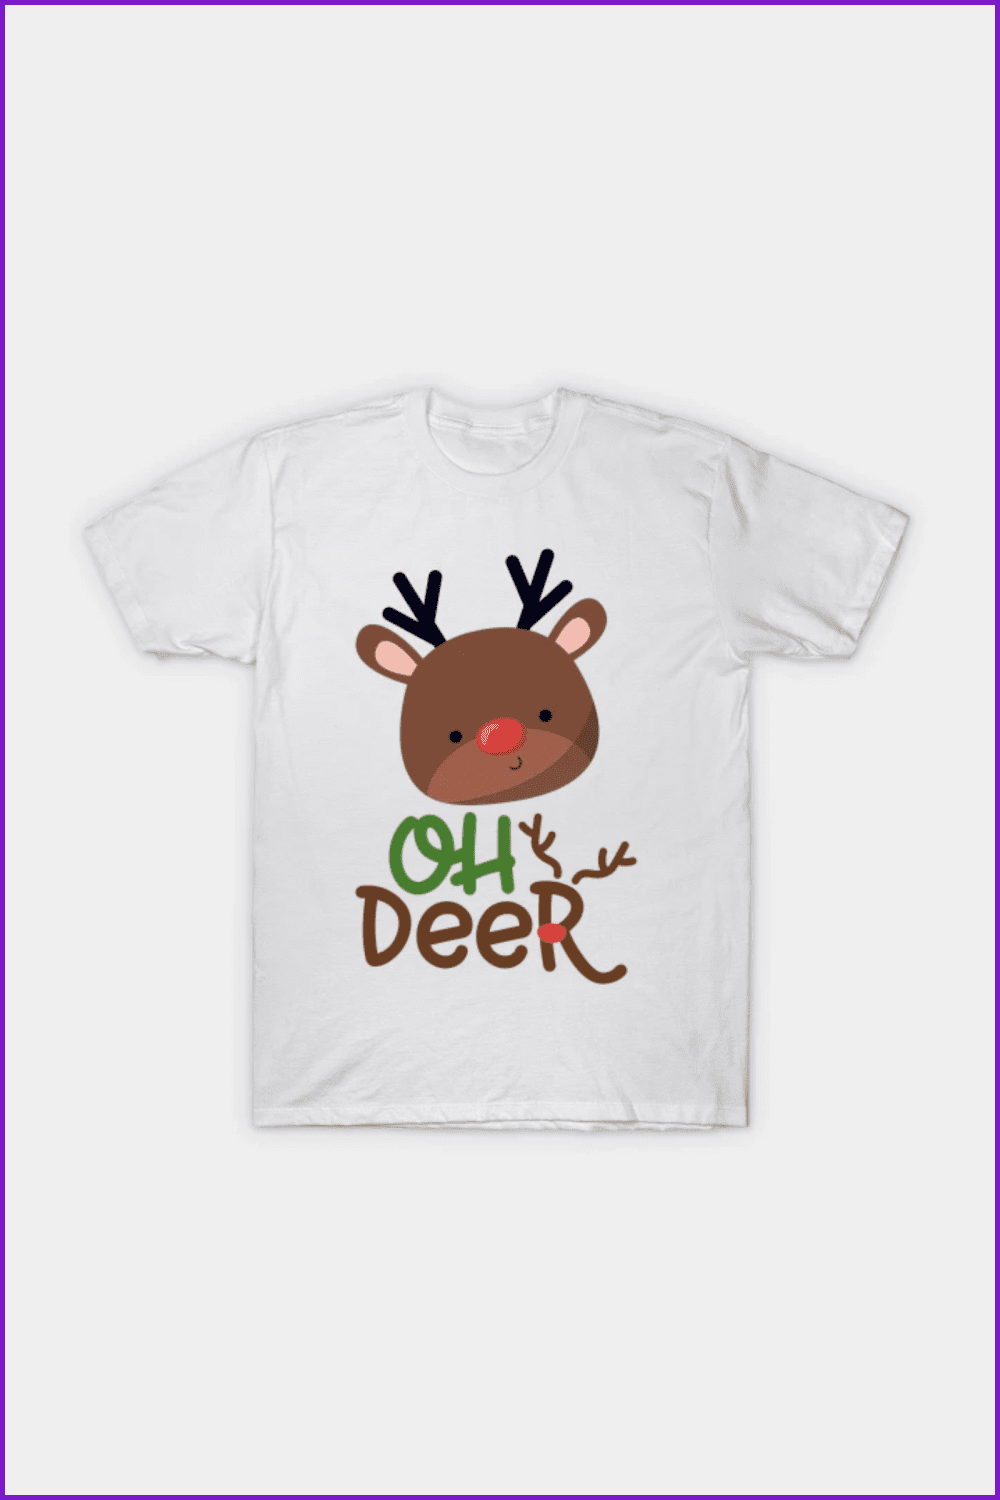 White t-shirt with deer and funny text.